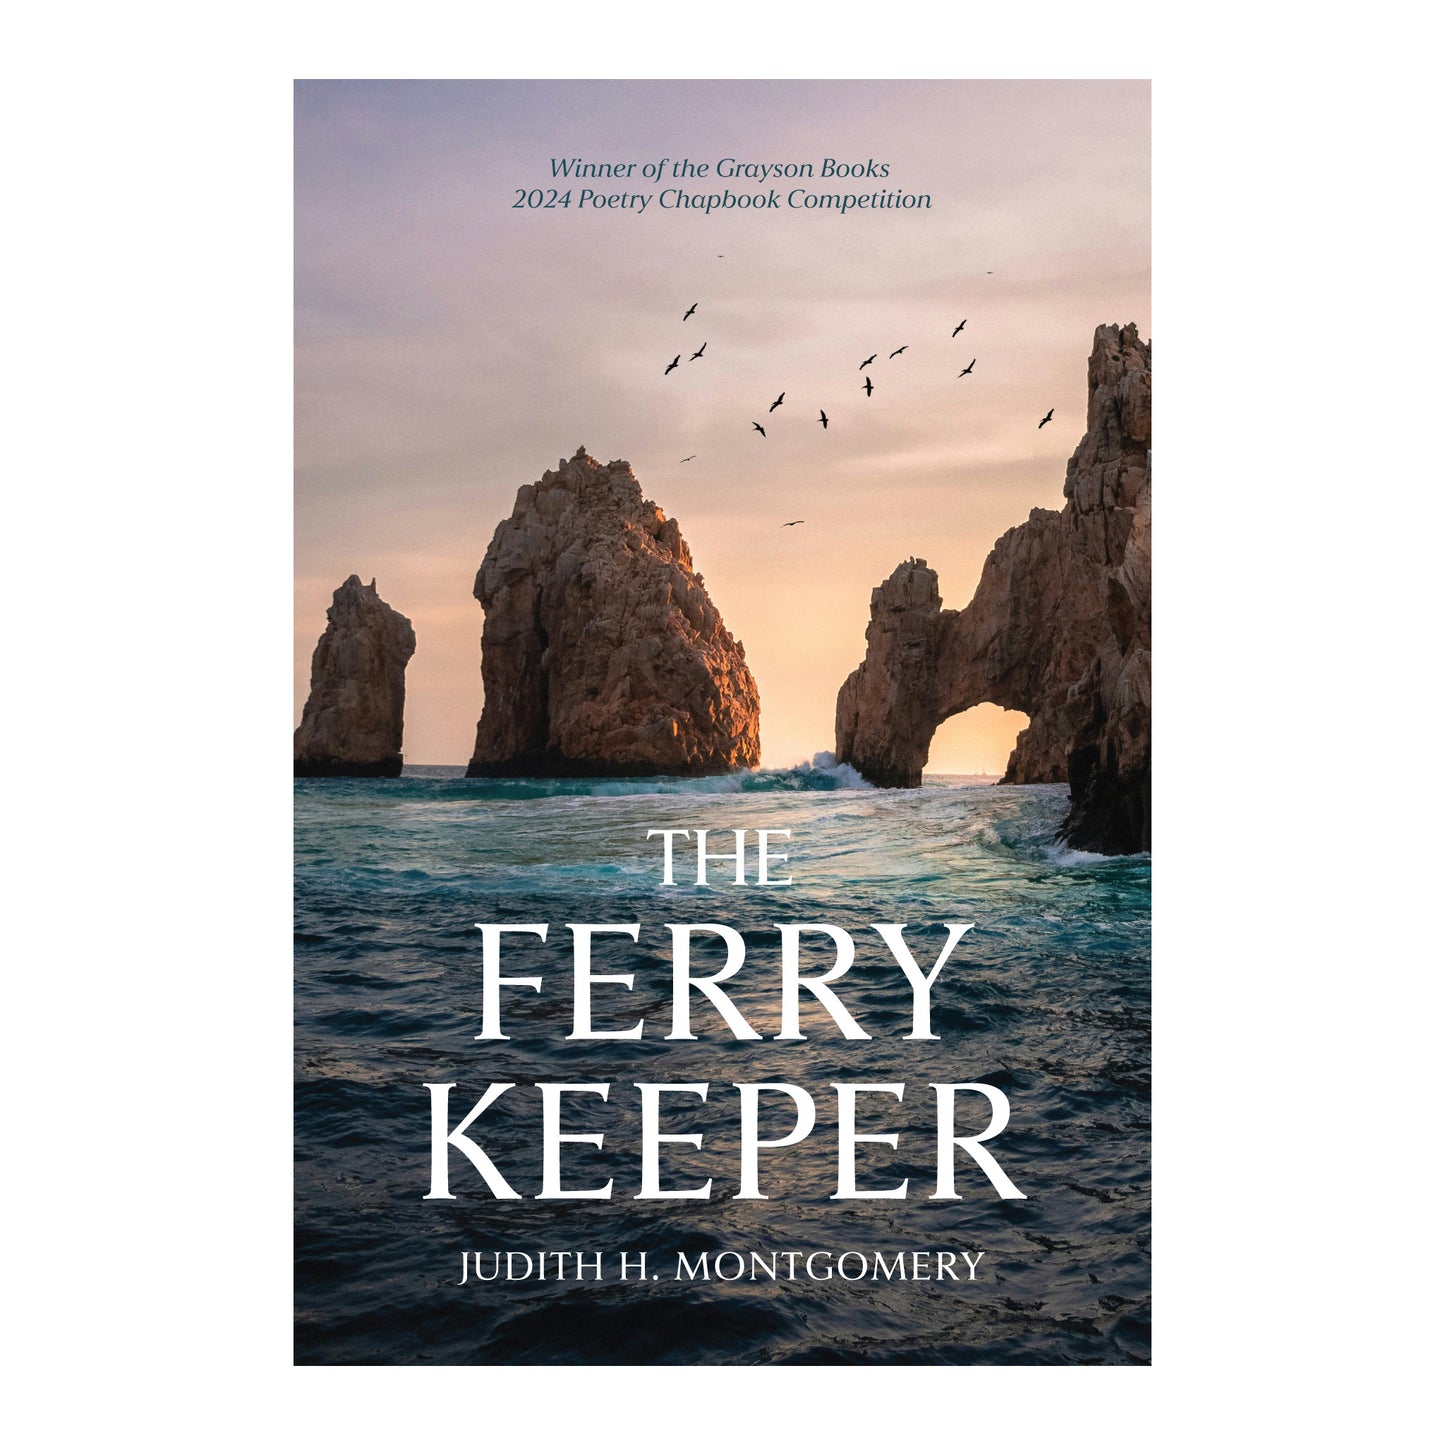 The Ferry Keeper by Judith H. Montgomery